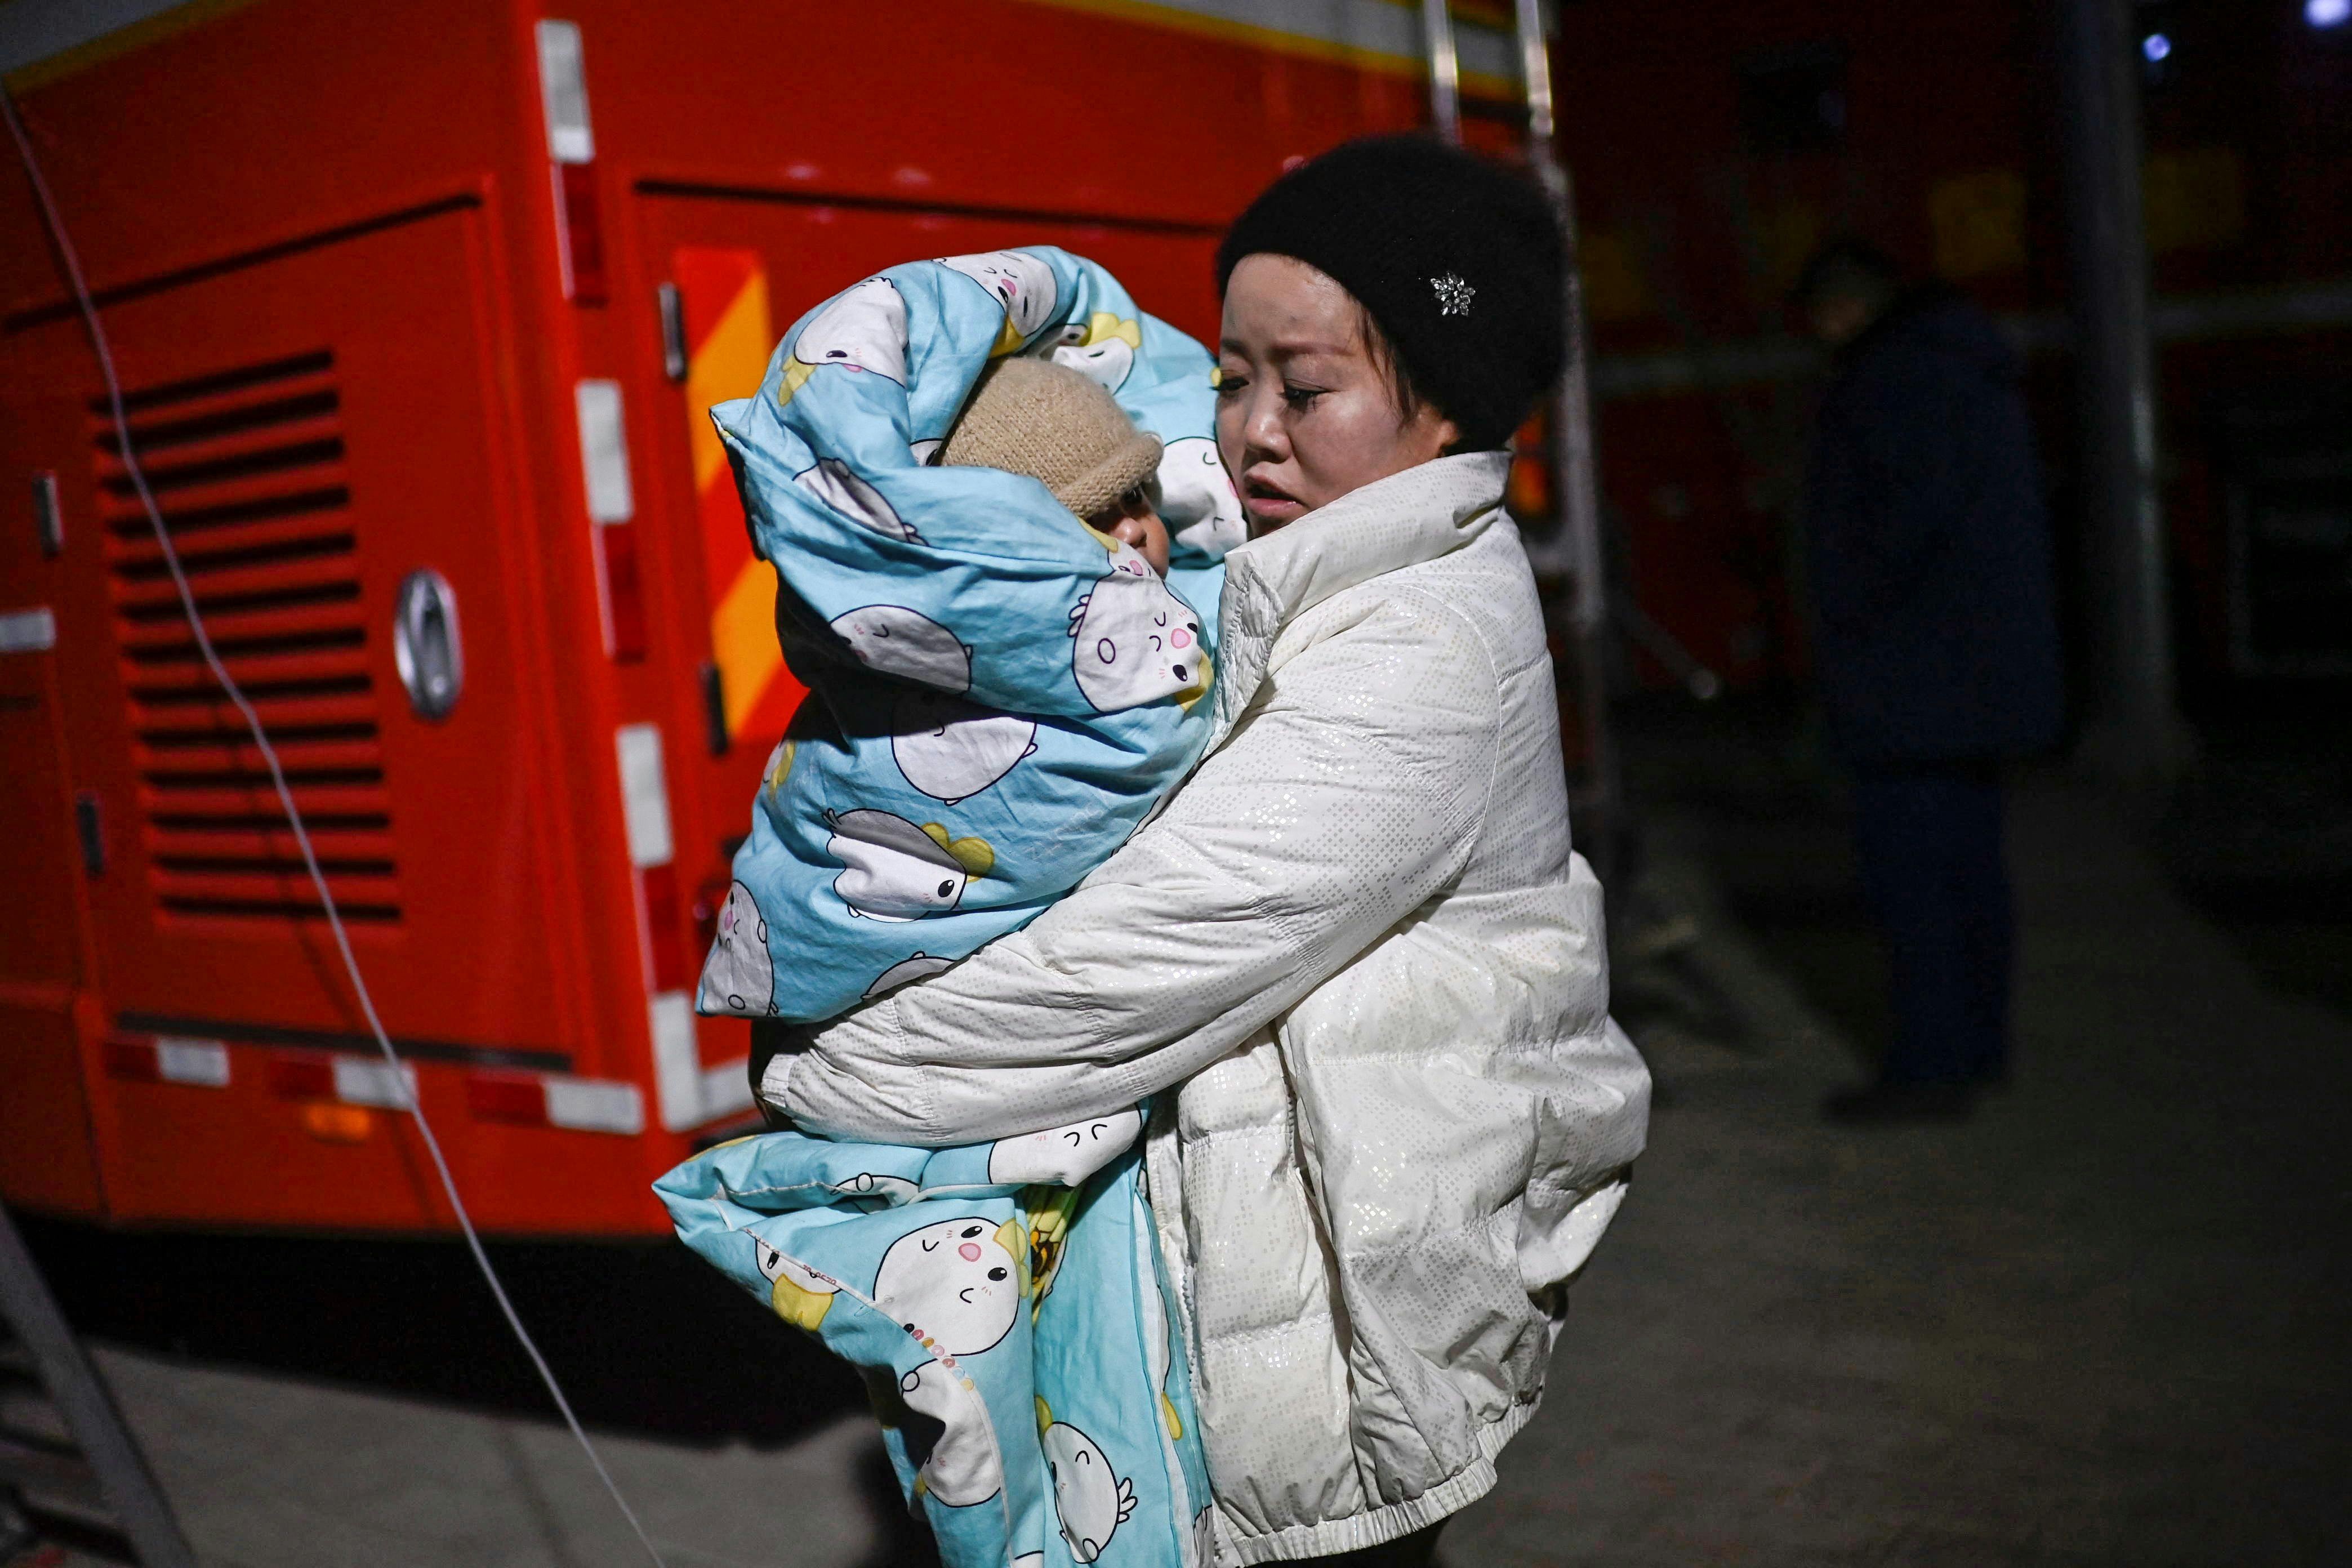 A woman holds a child on a street after an earthquake in Dahejia, Jishishan County in northwest China's Gansu province on December 19, 2023. (Photo by Pedro Pardo / AFP)